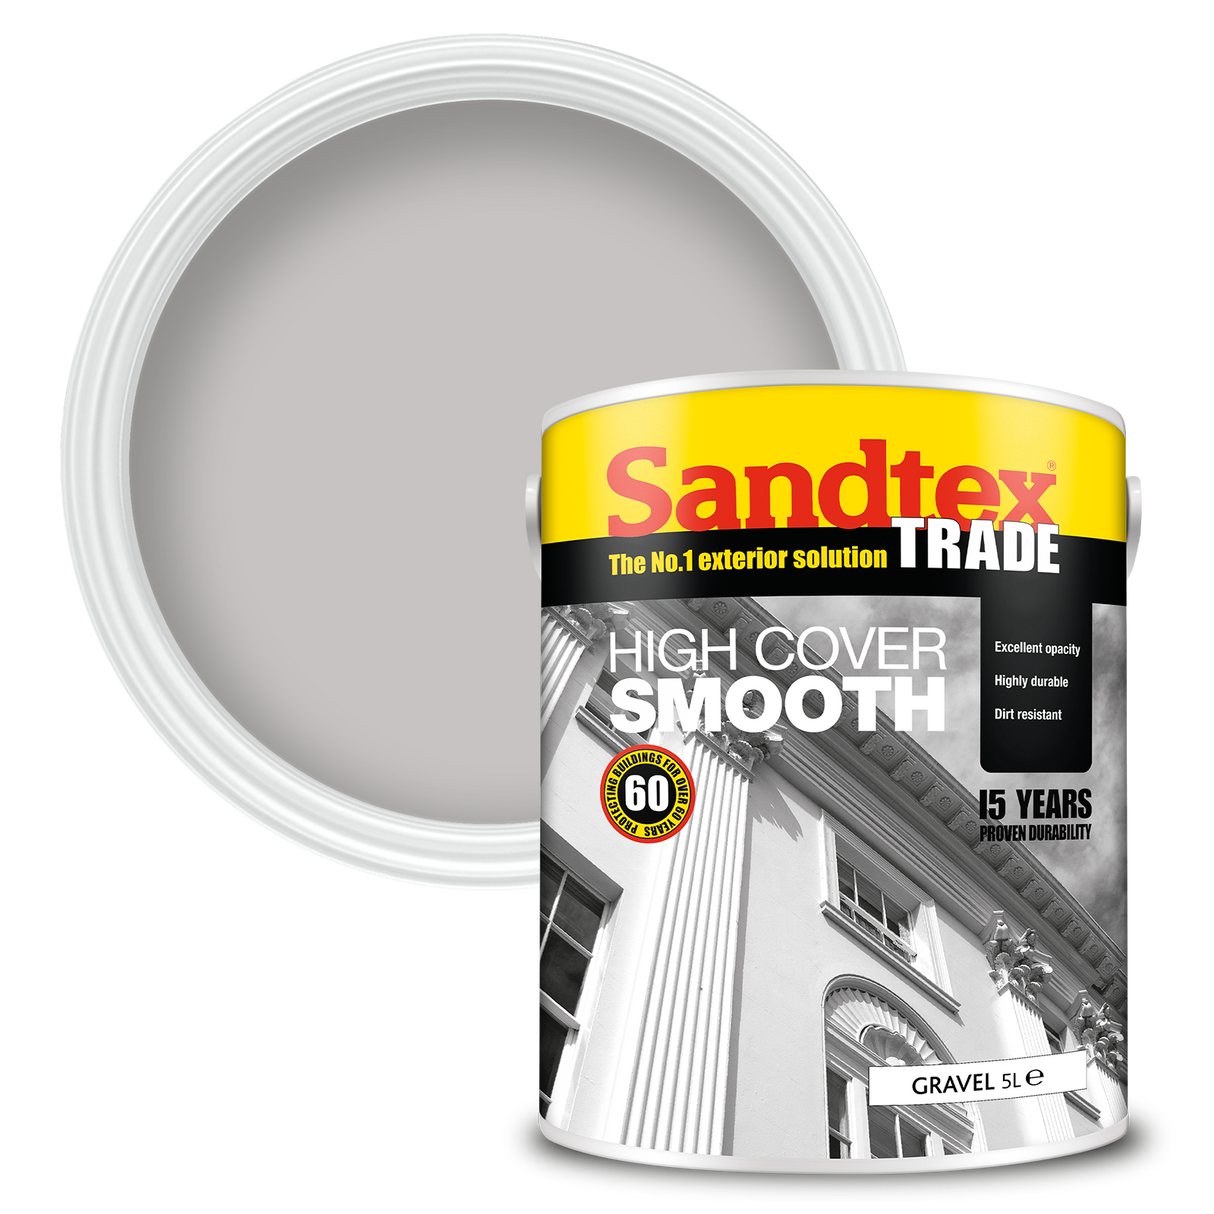 Sandtex-Trade-High-Cover-Smooth-Gravel-5L